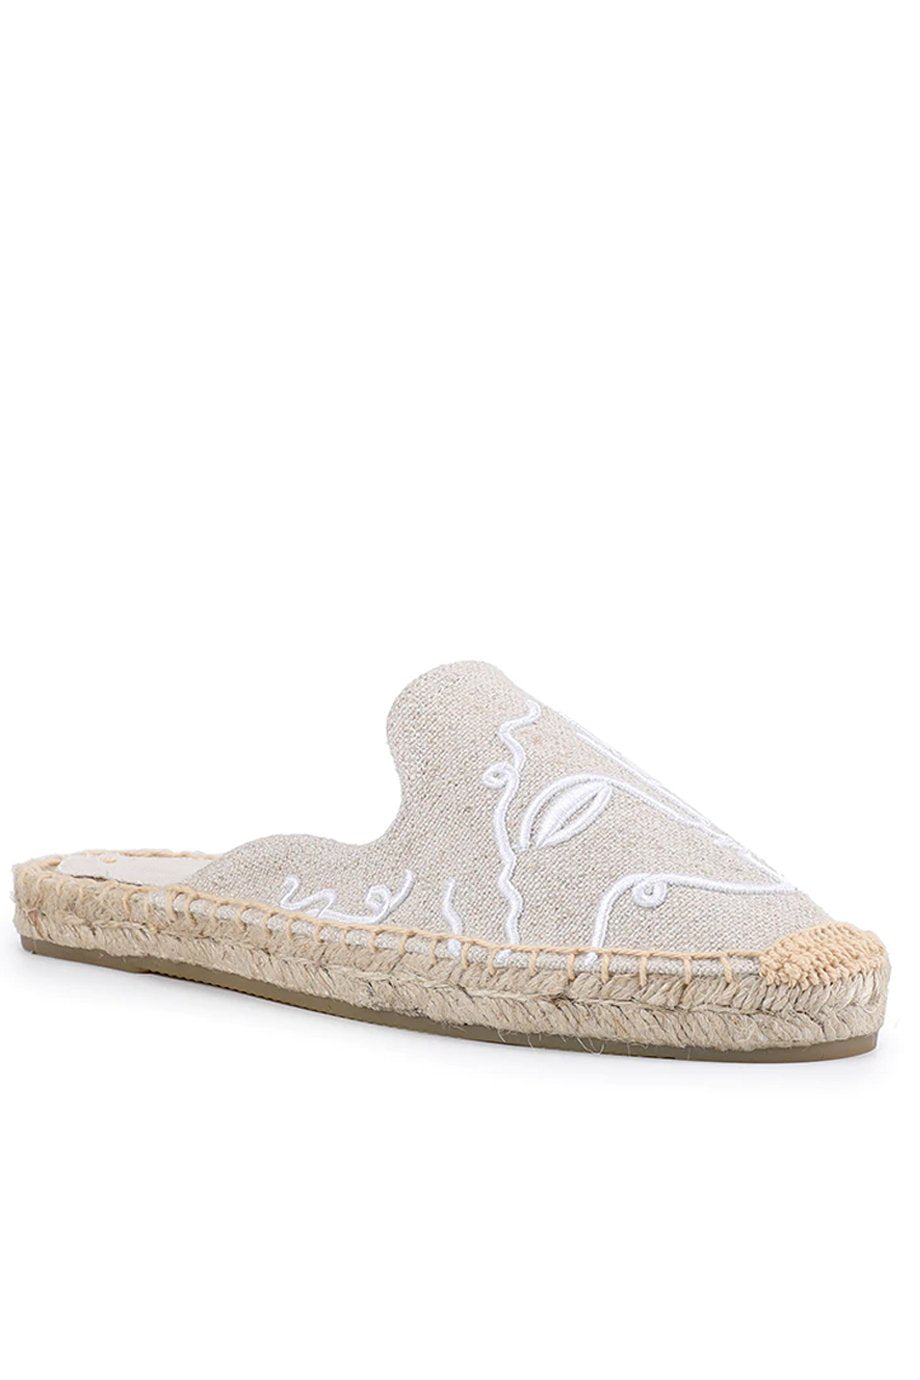 La Cara Beige Espadrilles with Embroidery